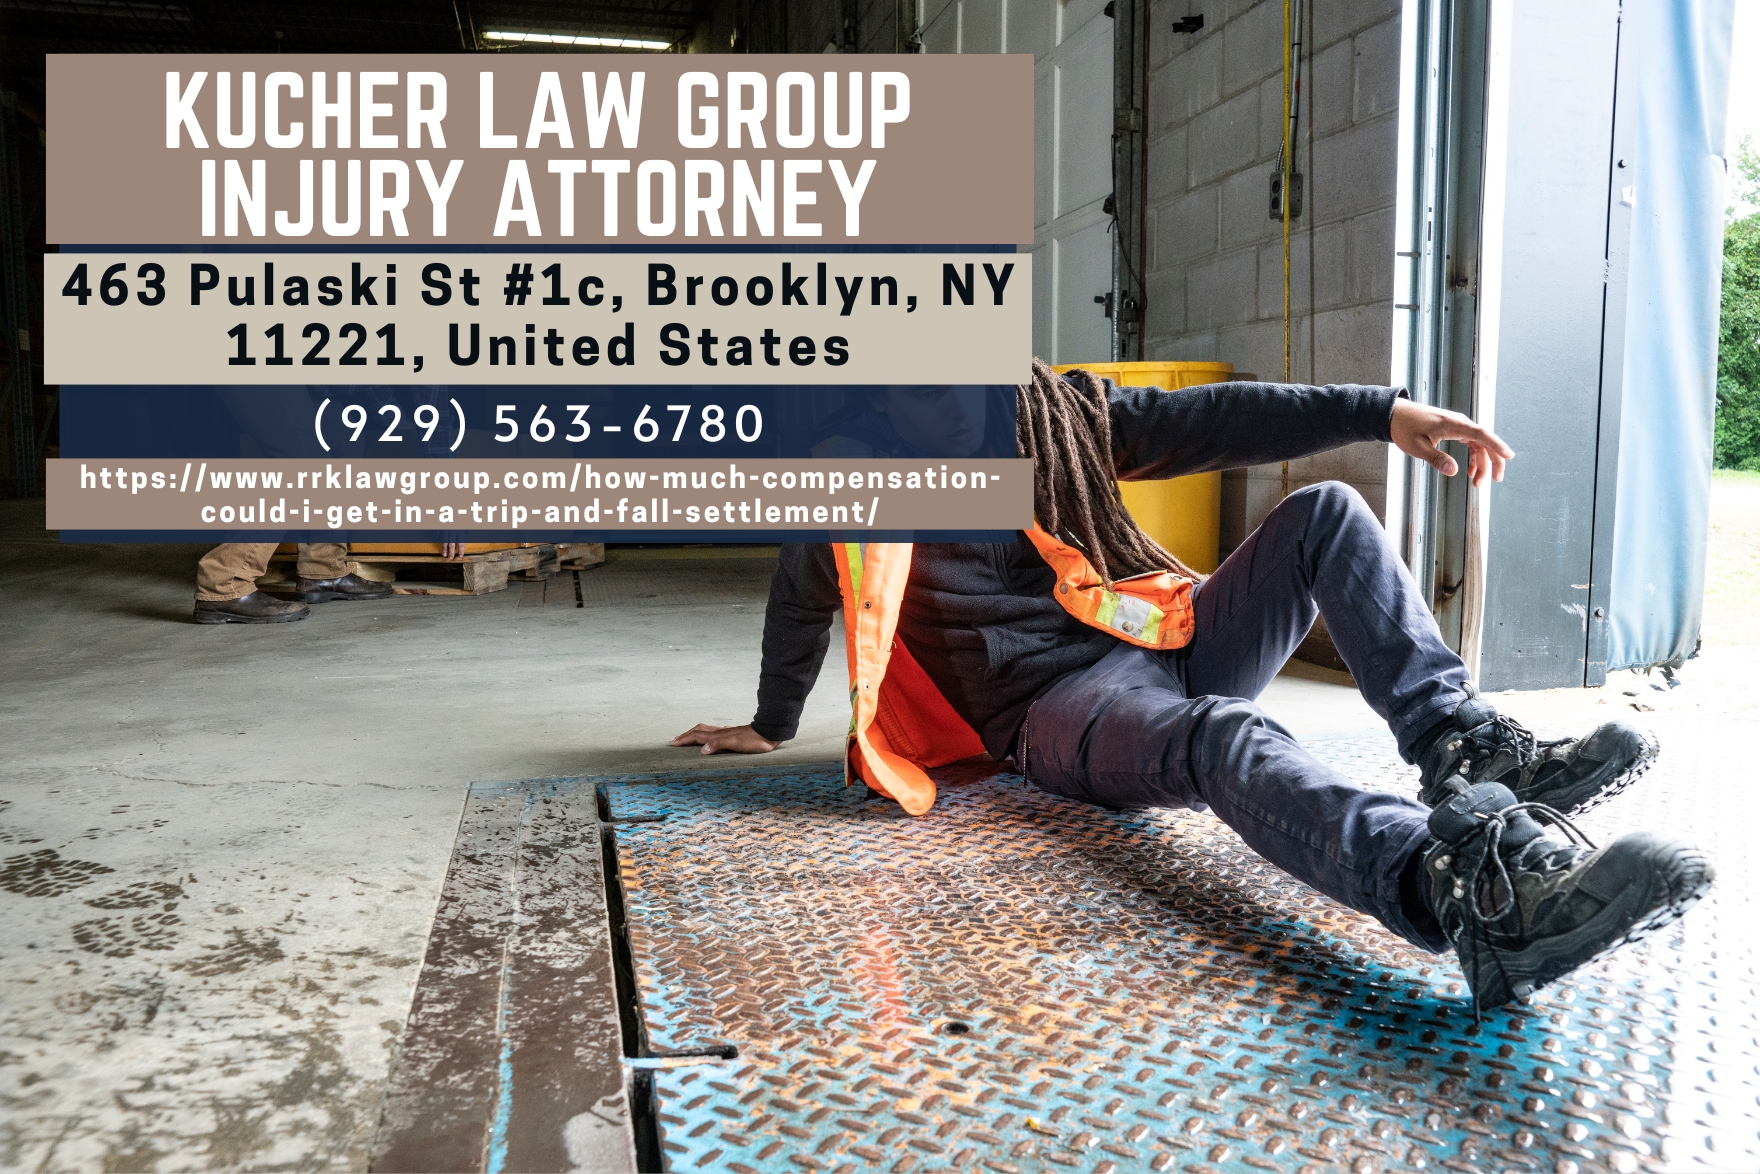 Brooklyn Slip and Fall Lawyer Samantha Kucher Releases Insightful Article on Compensation for Trip and Fall Settlements